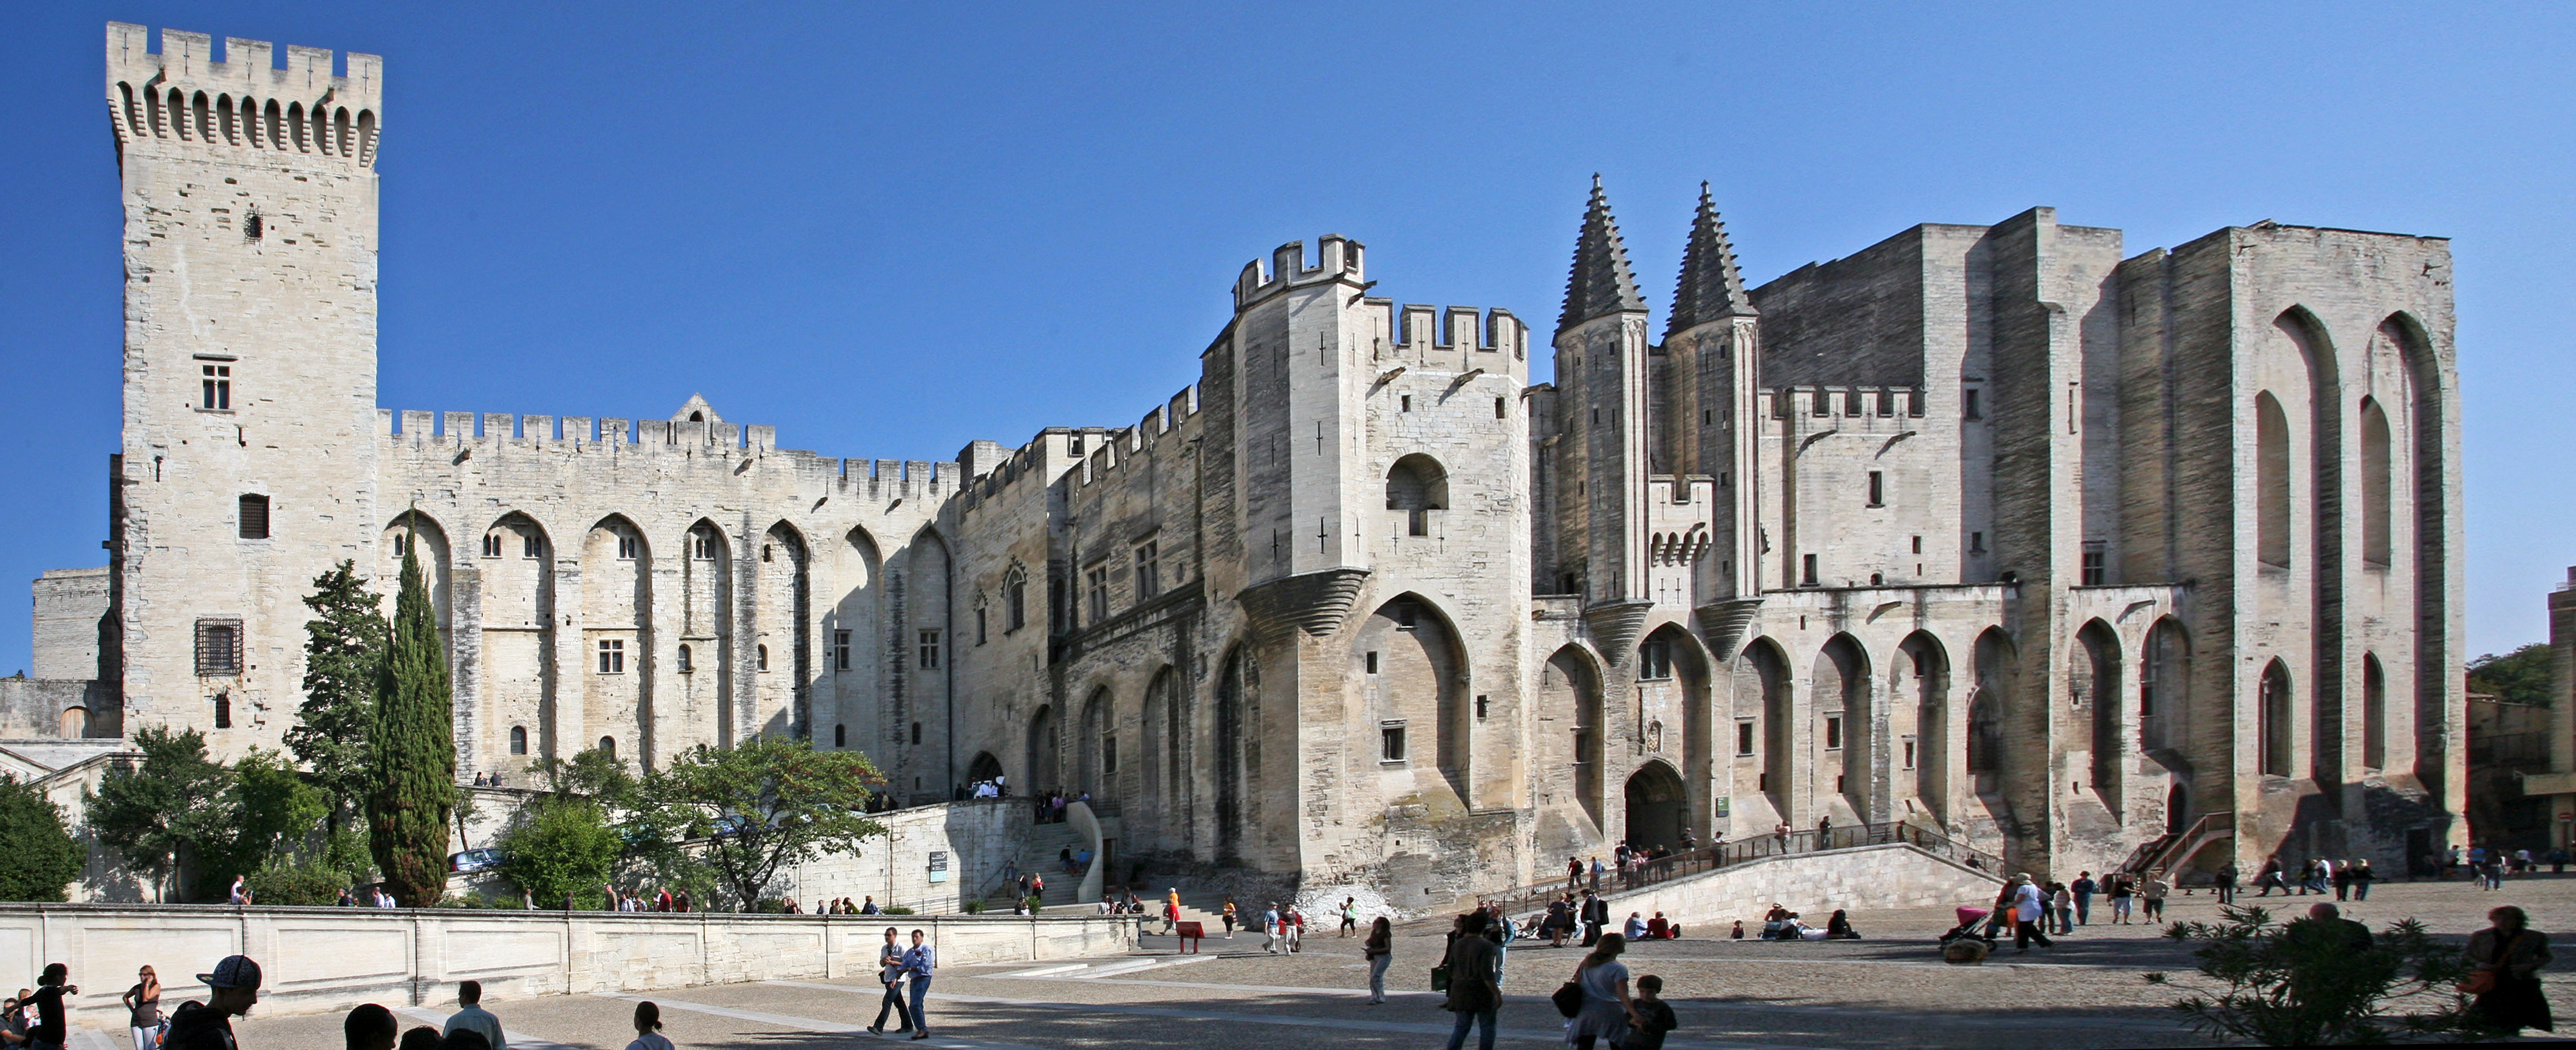 Papal Palace in Avignon, France